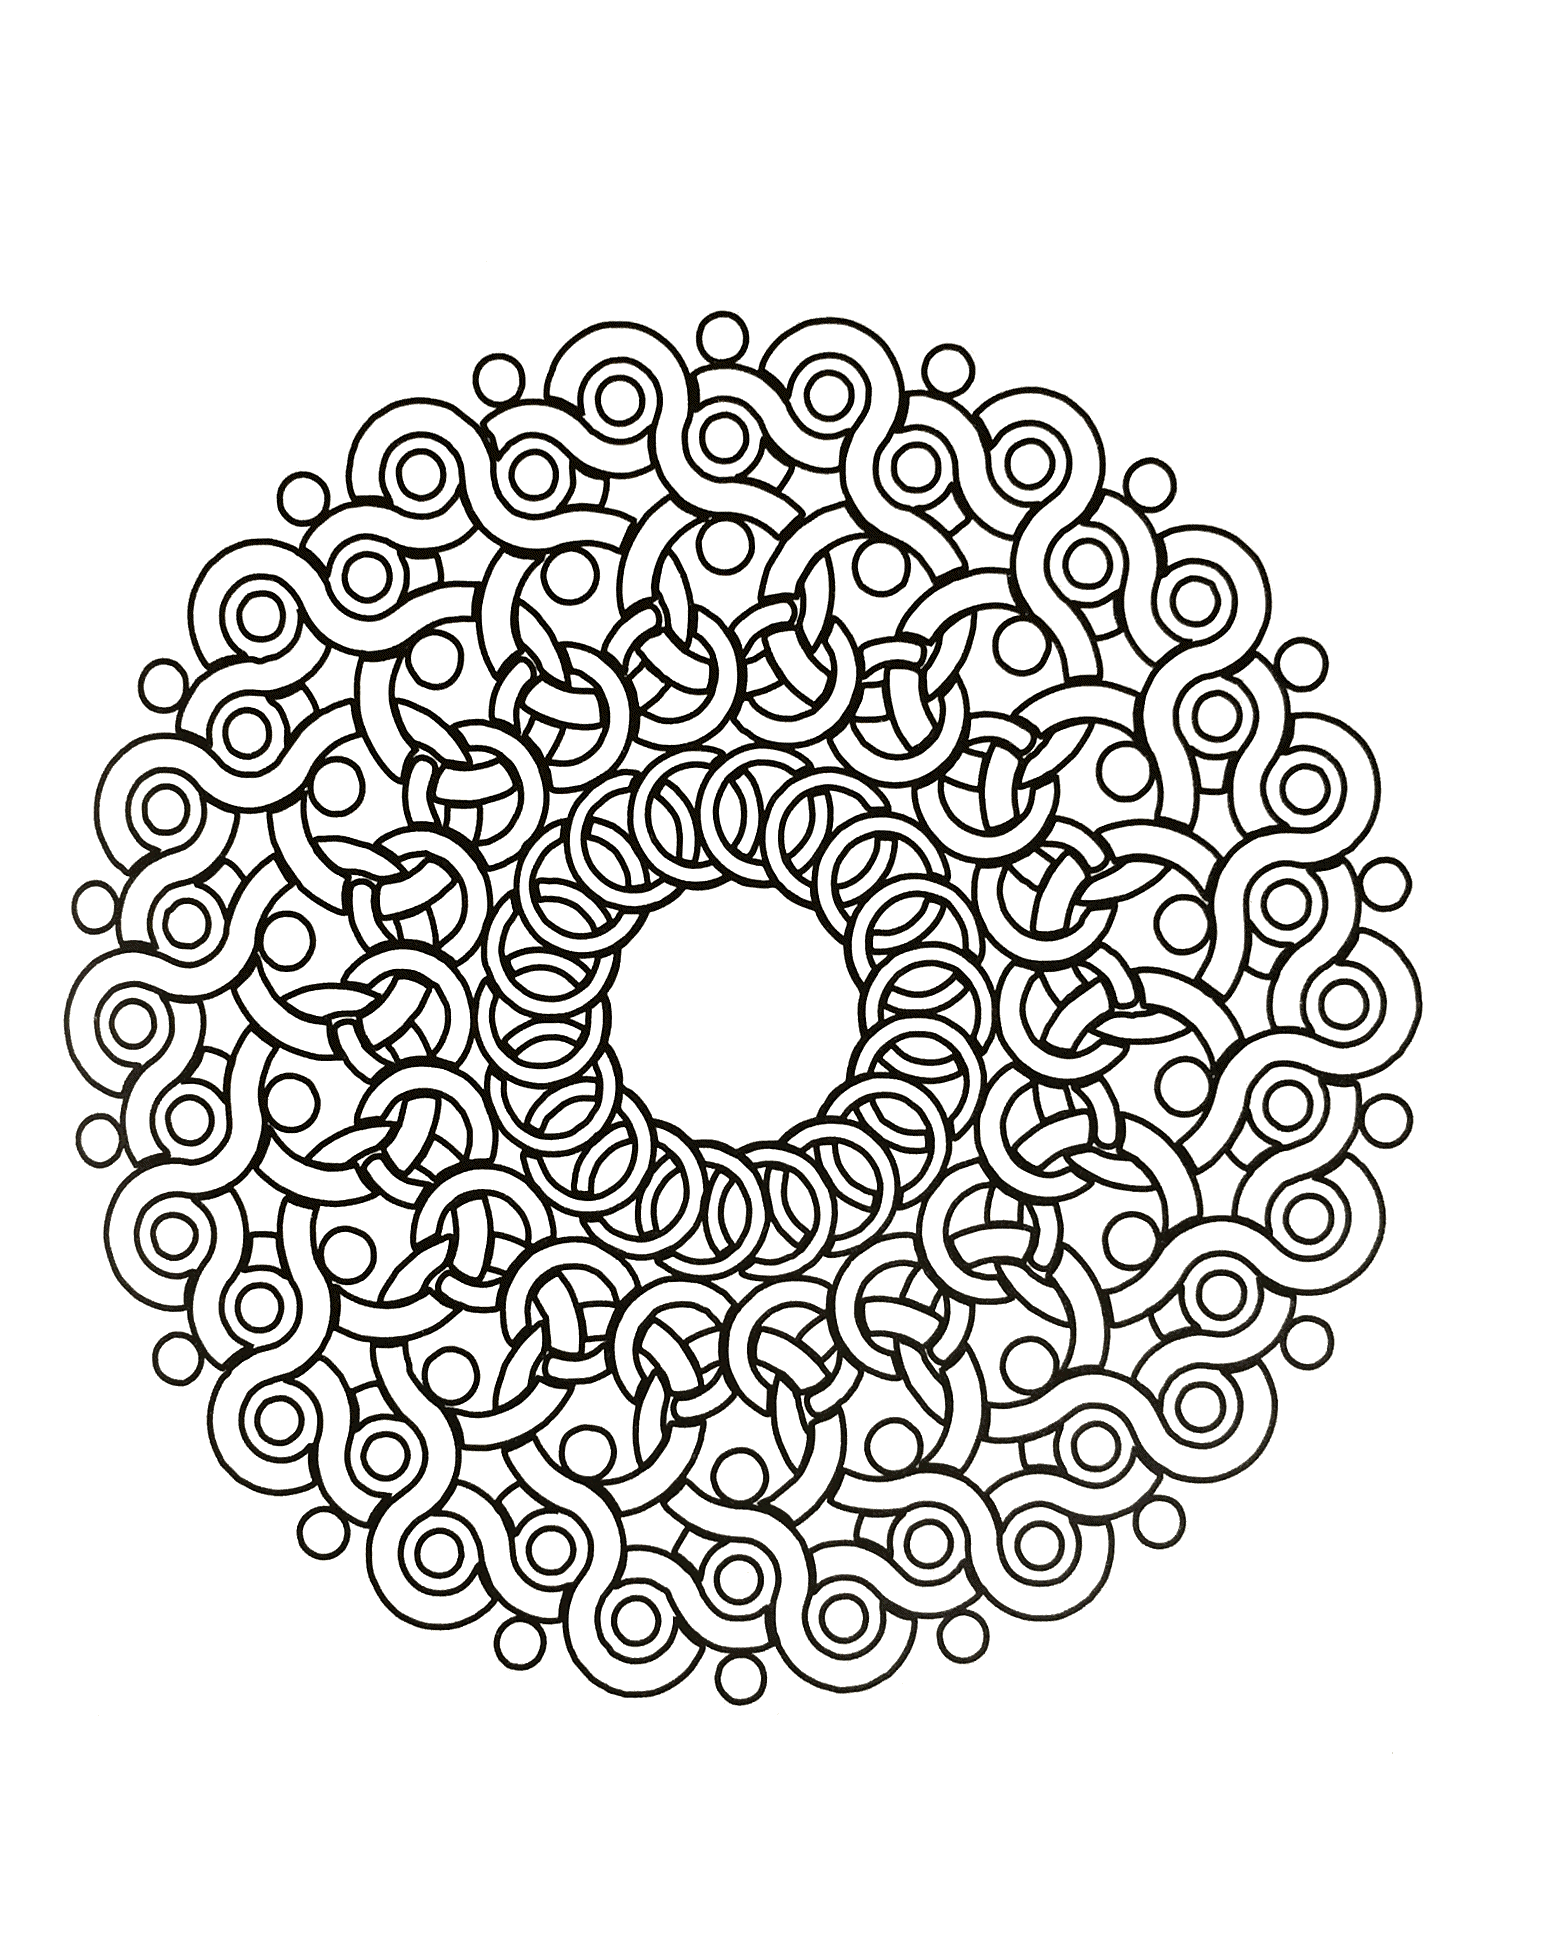 Mandala to print and color for free ... drawing made with rings, not too difficult. A Mandala for the pros ! High number of small areas waiting for colors chosen with artistic sense. Let your mind wander : this step is essential to get the most out of coloring to reduce your anxiety & stress.